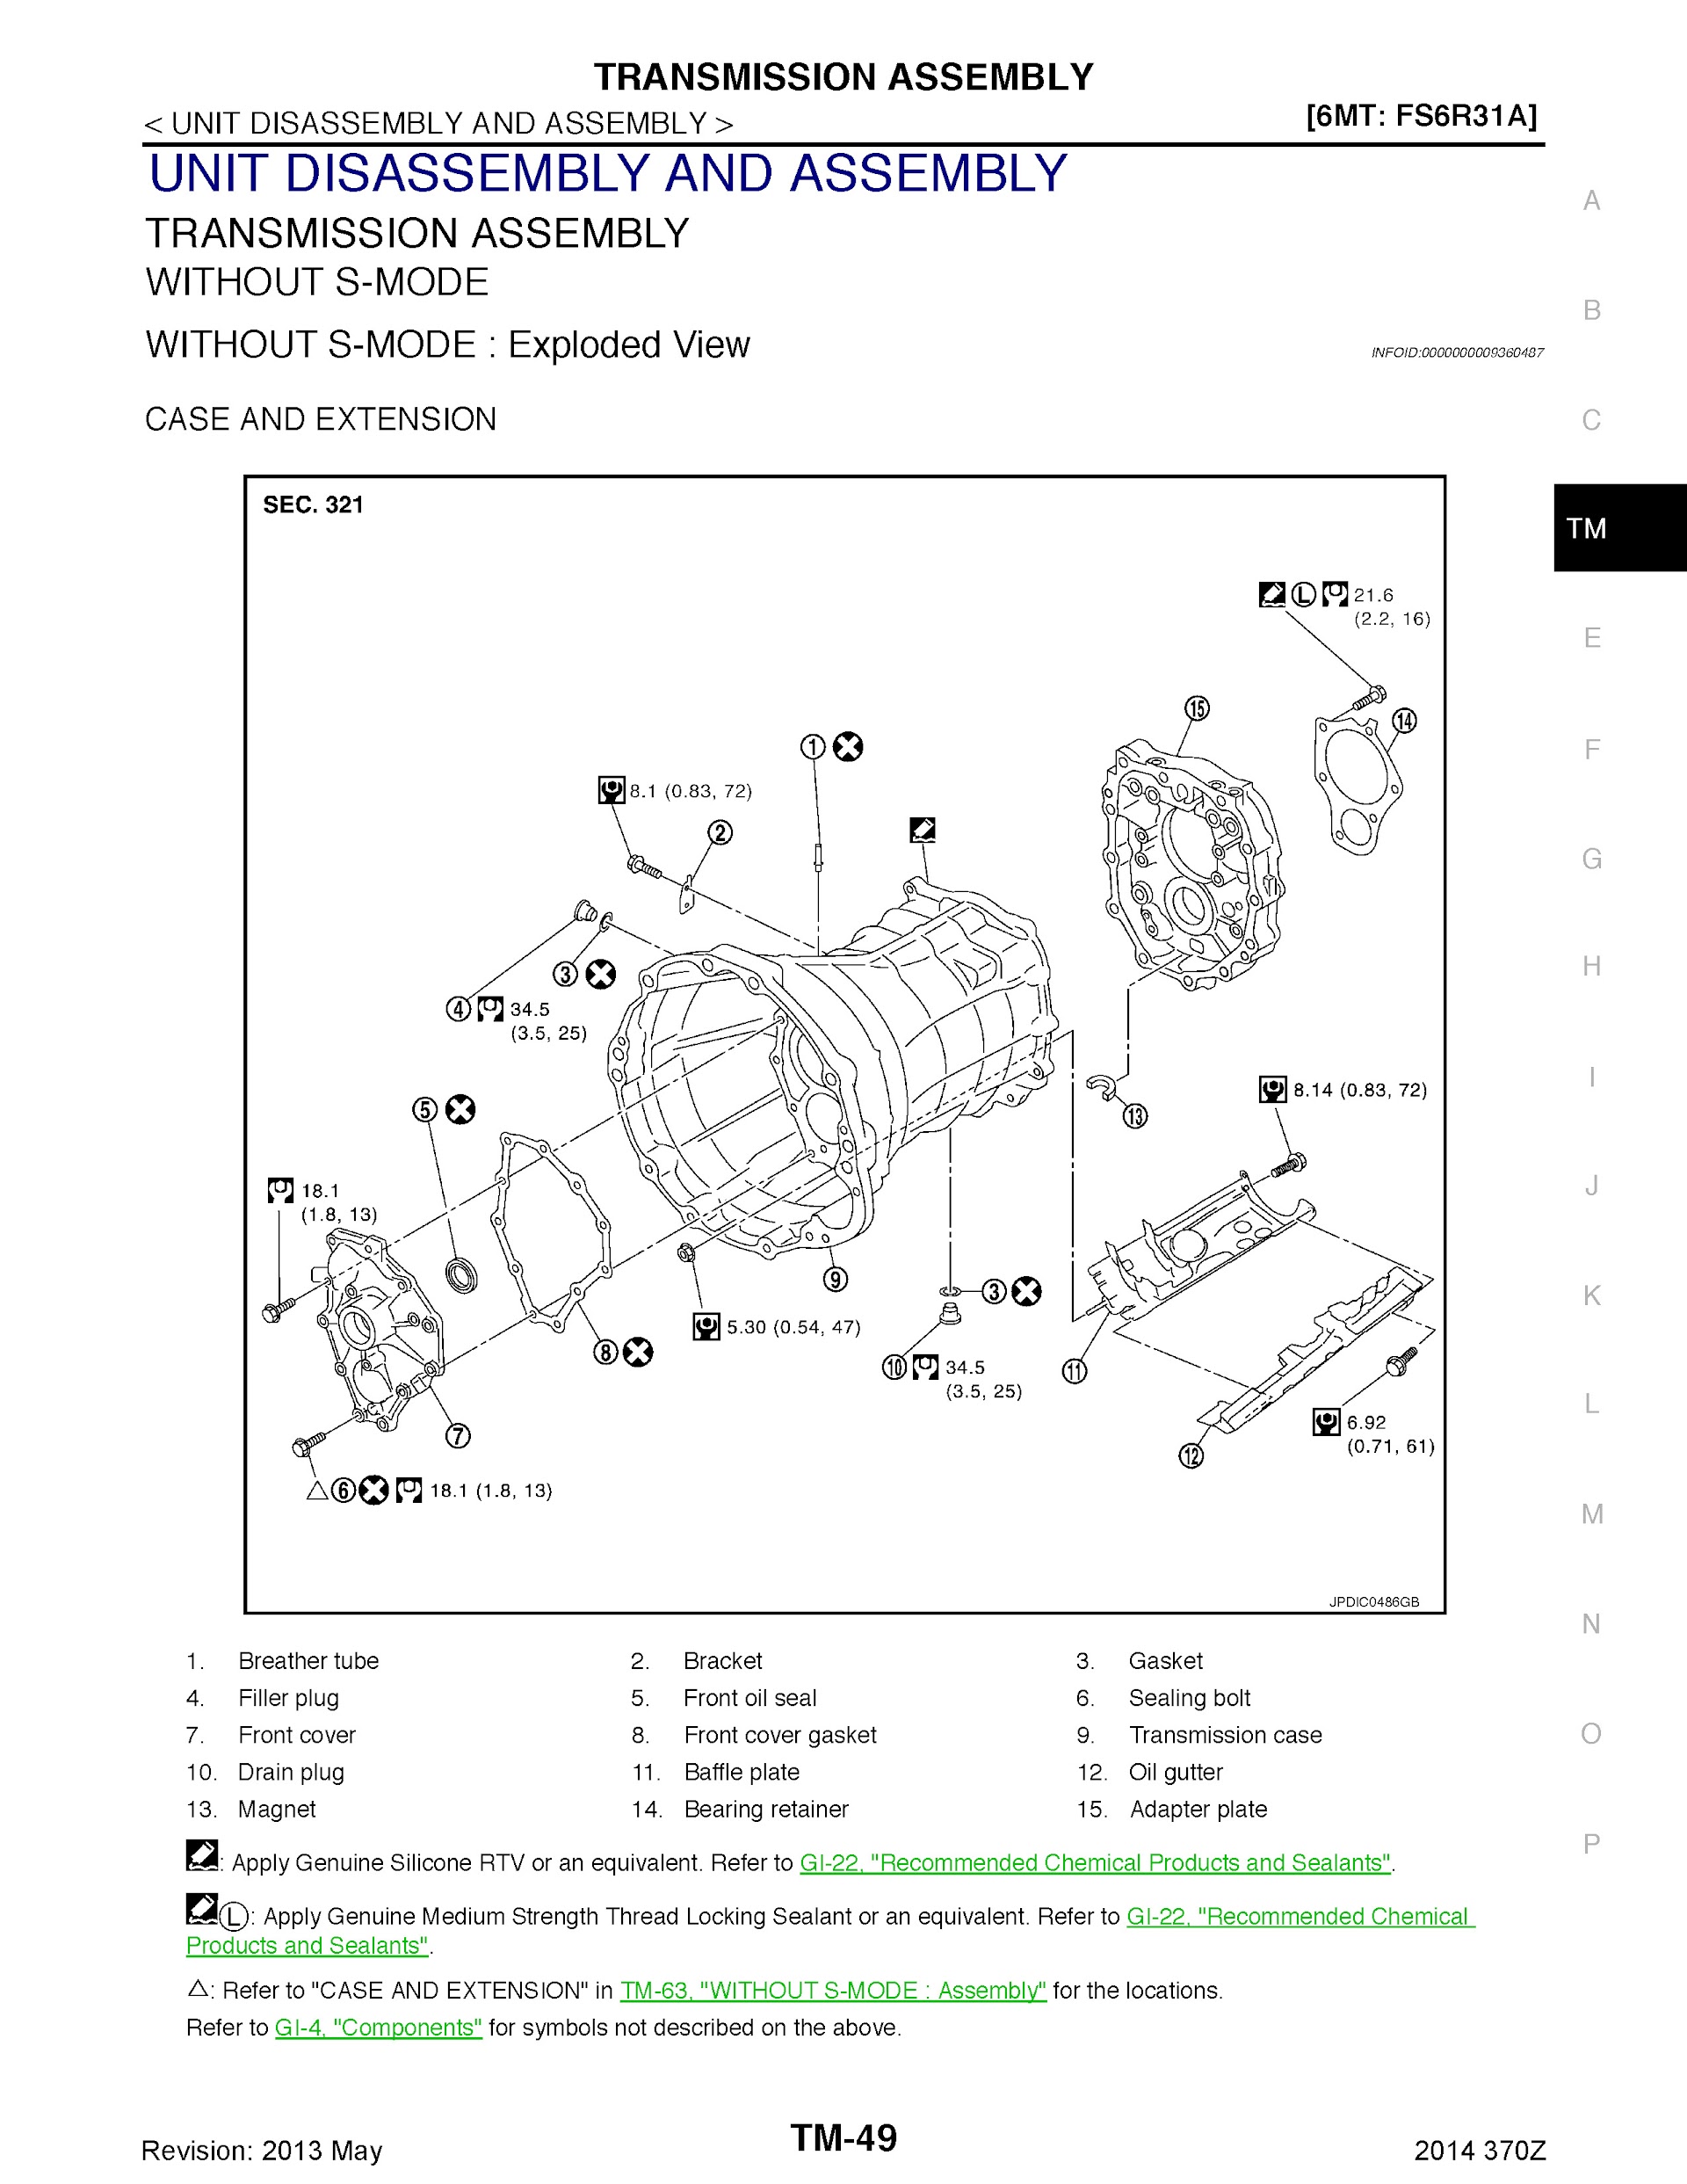 CONTENTS: 2014 Nissan 370Z Repair Manual, Transmission Assembly